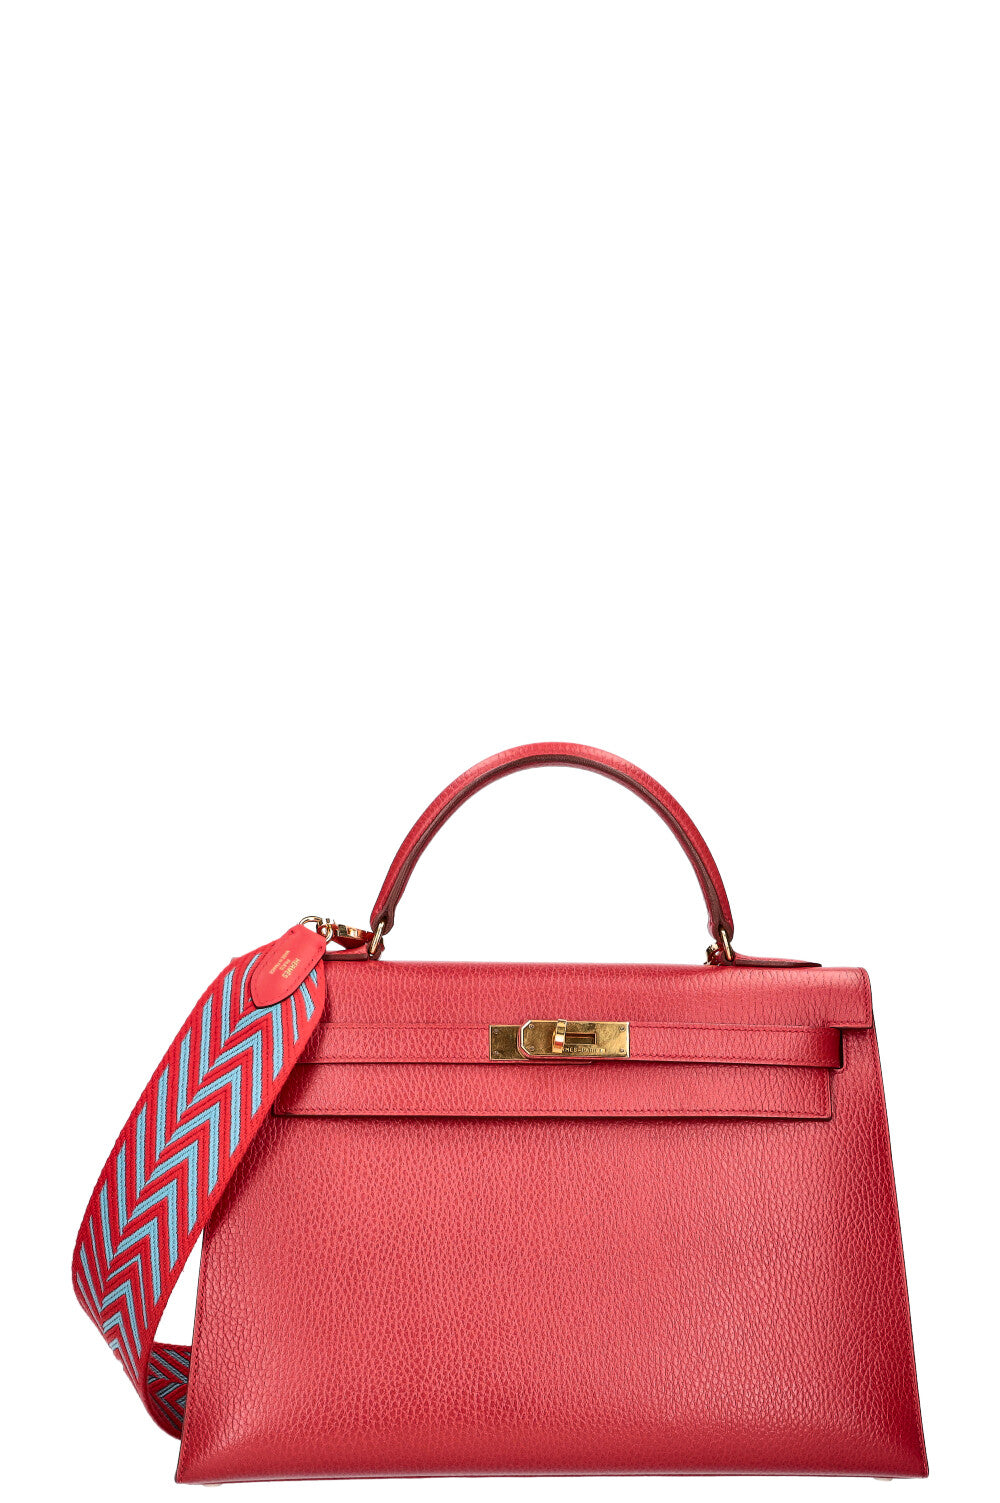 At Auction: Hermes Kelly Handbag Rouge Vif Ardennes with Gold Hardware 32  Red